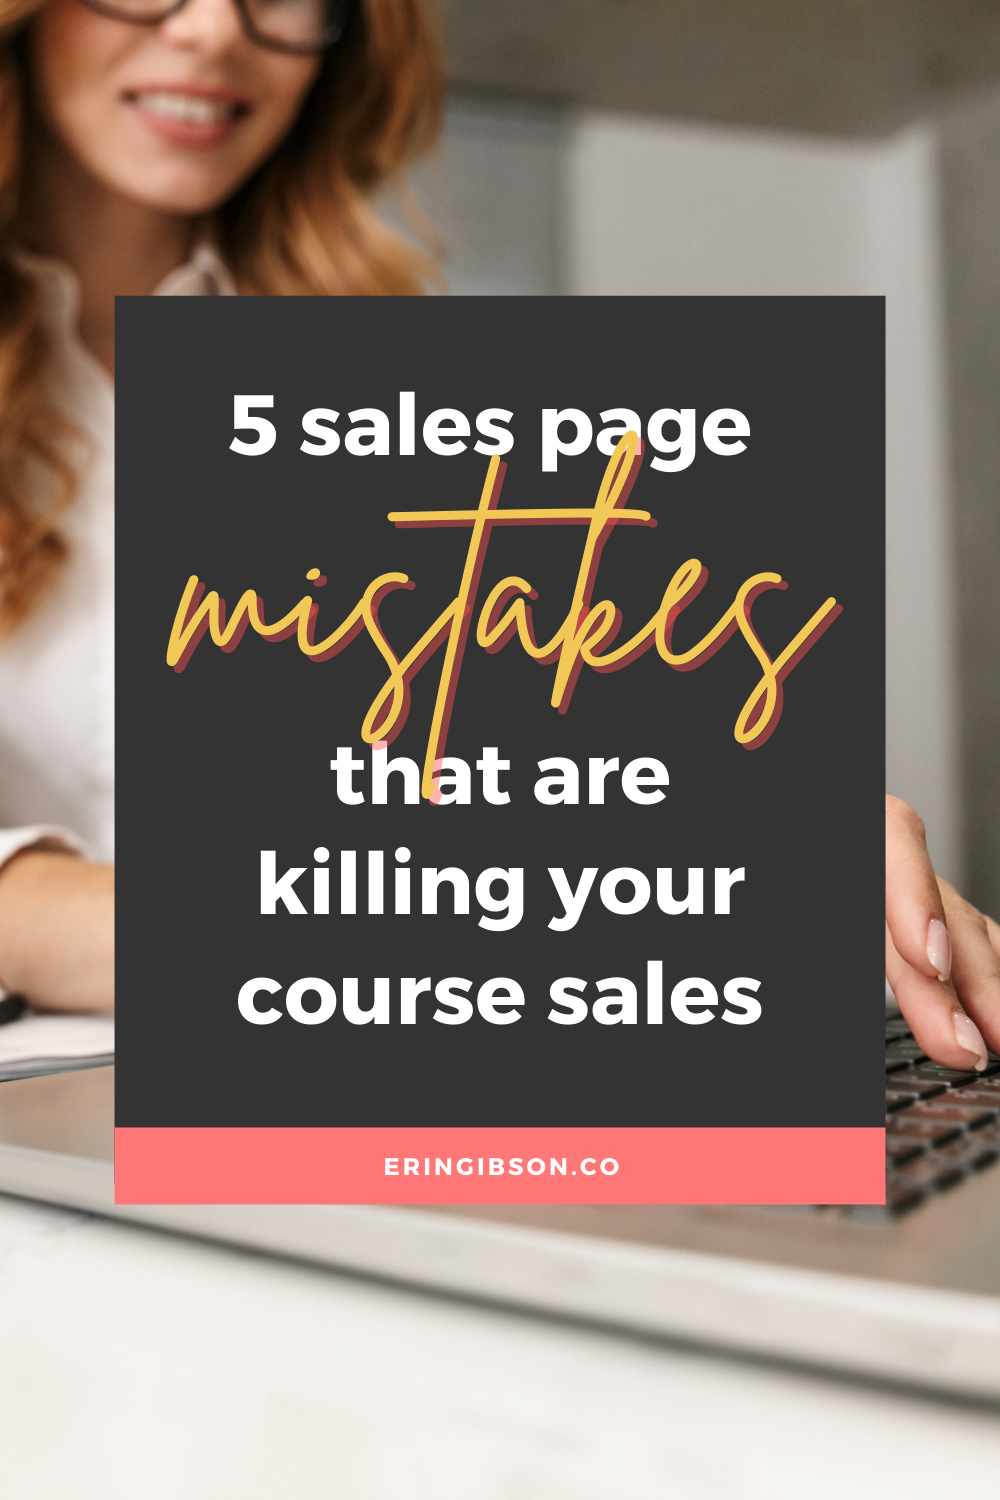 5 sales page mistakes that are killing your course sales